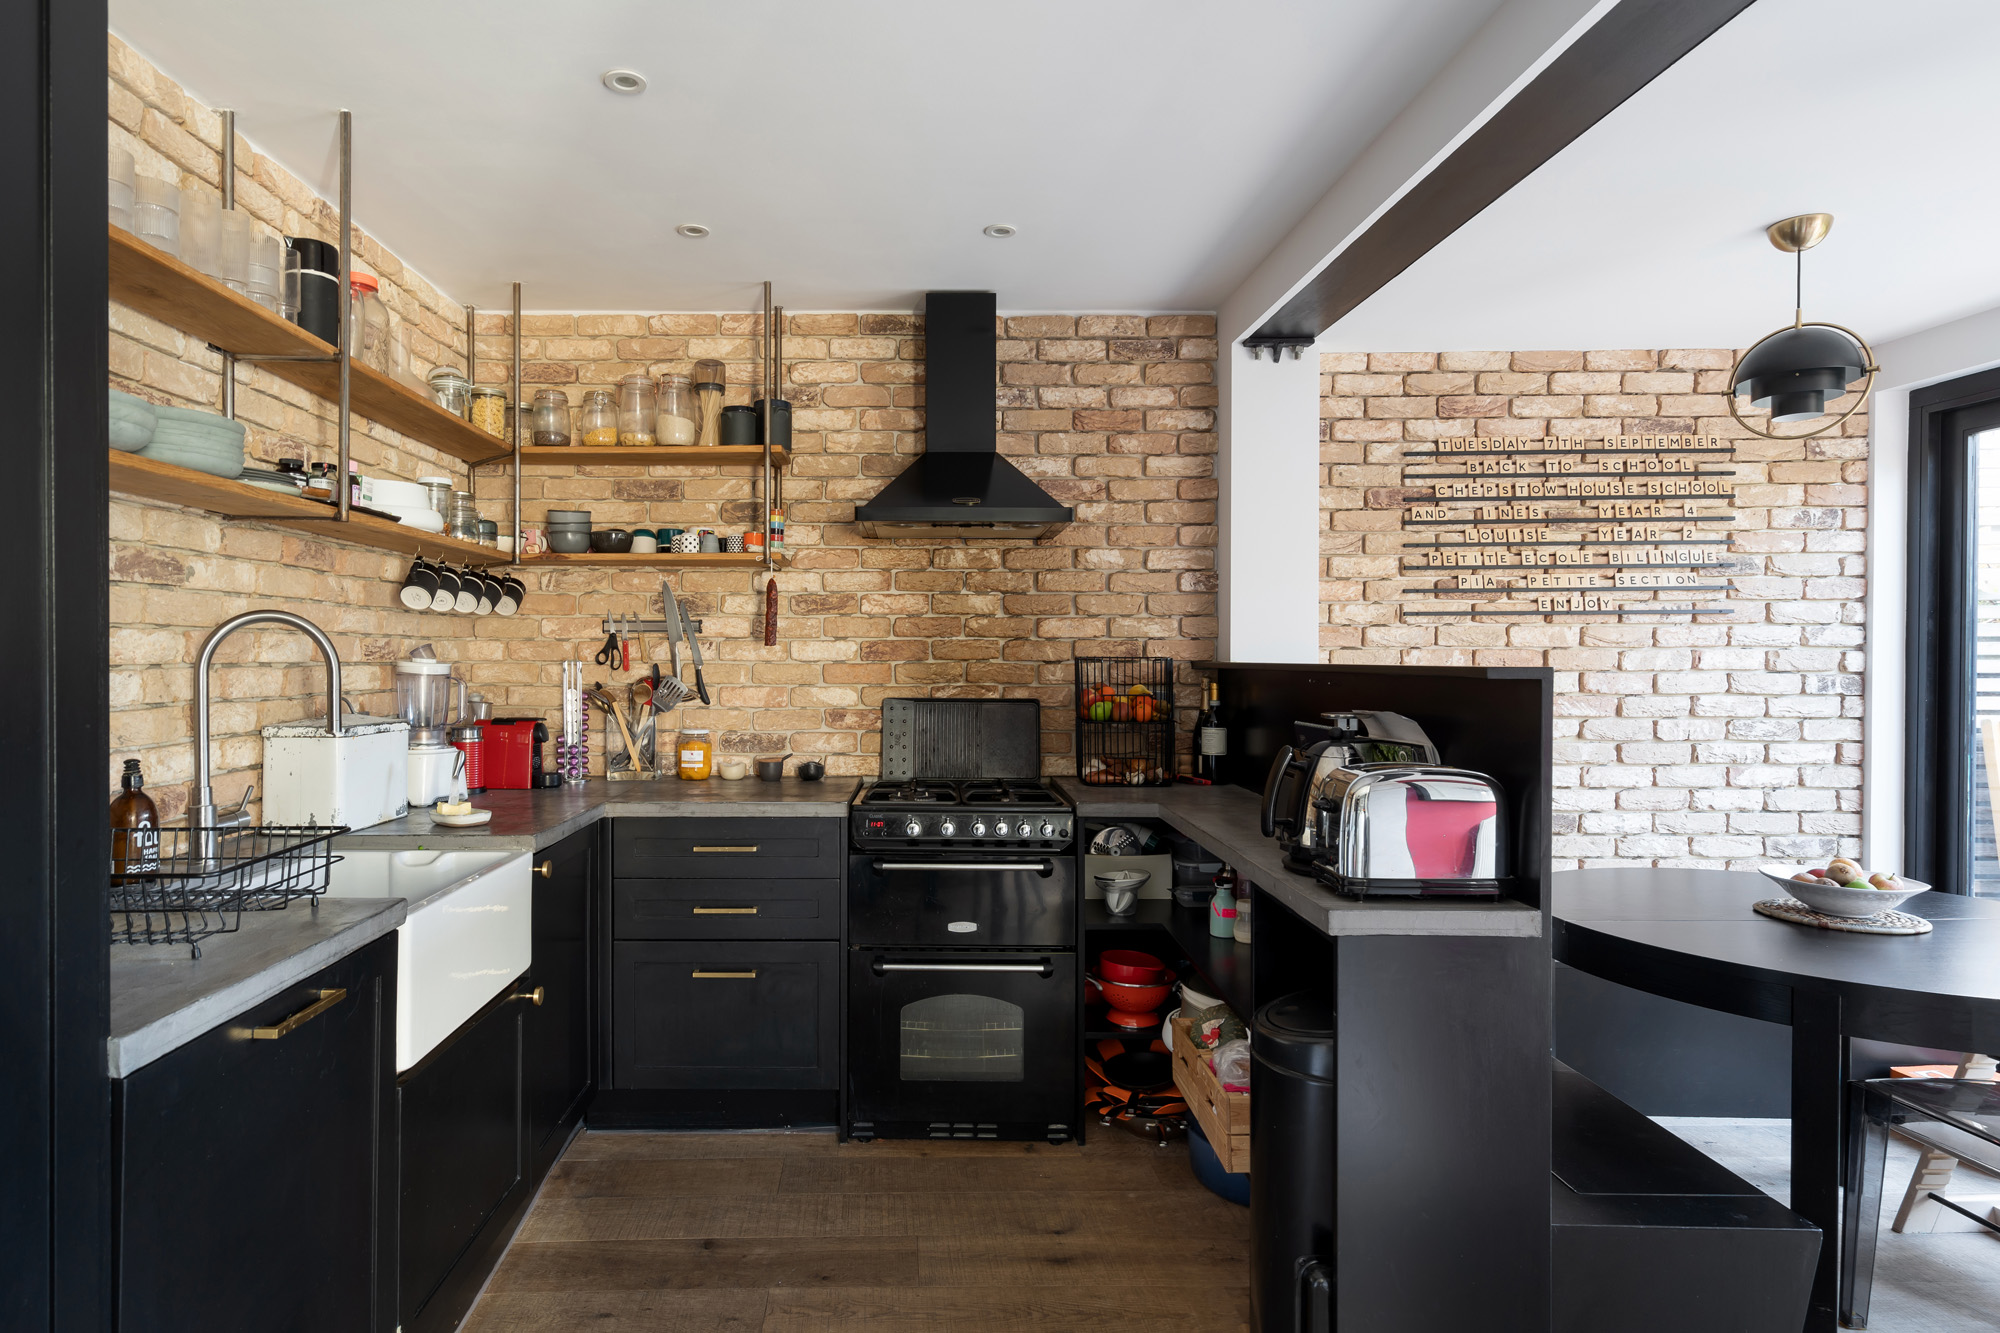 For Sale: St Marks Road North Kensington W10 stylish monochromatic kitchen and exposed brick wall